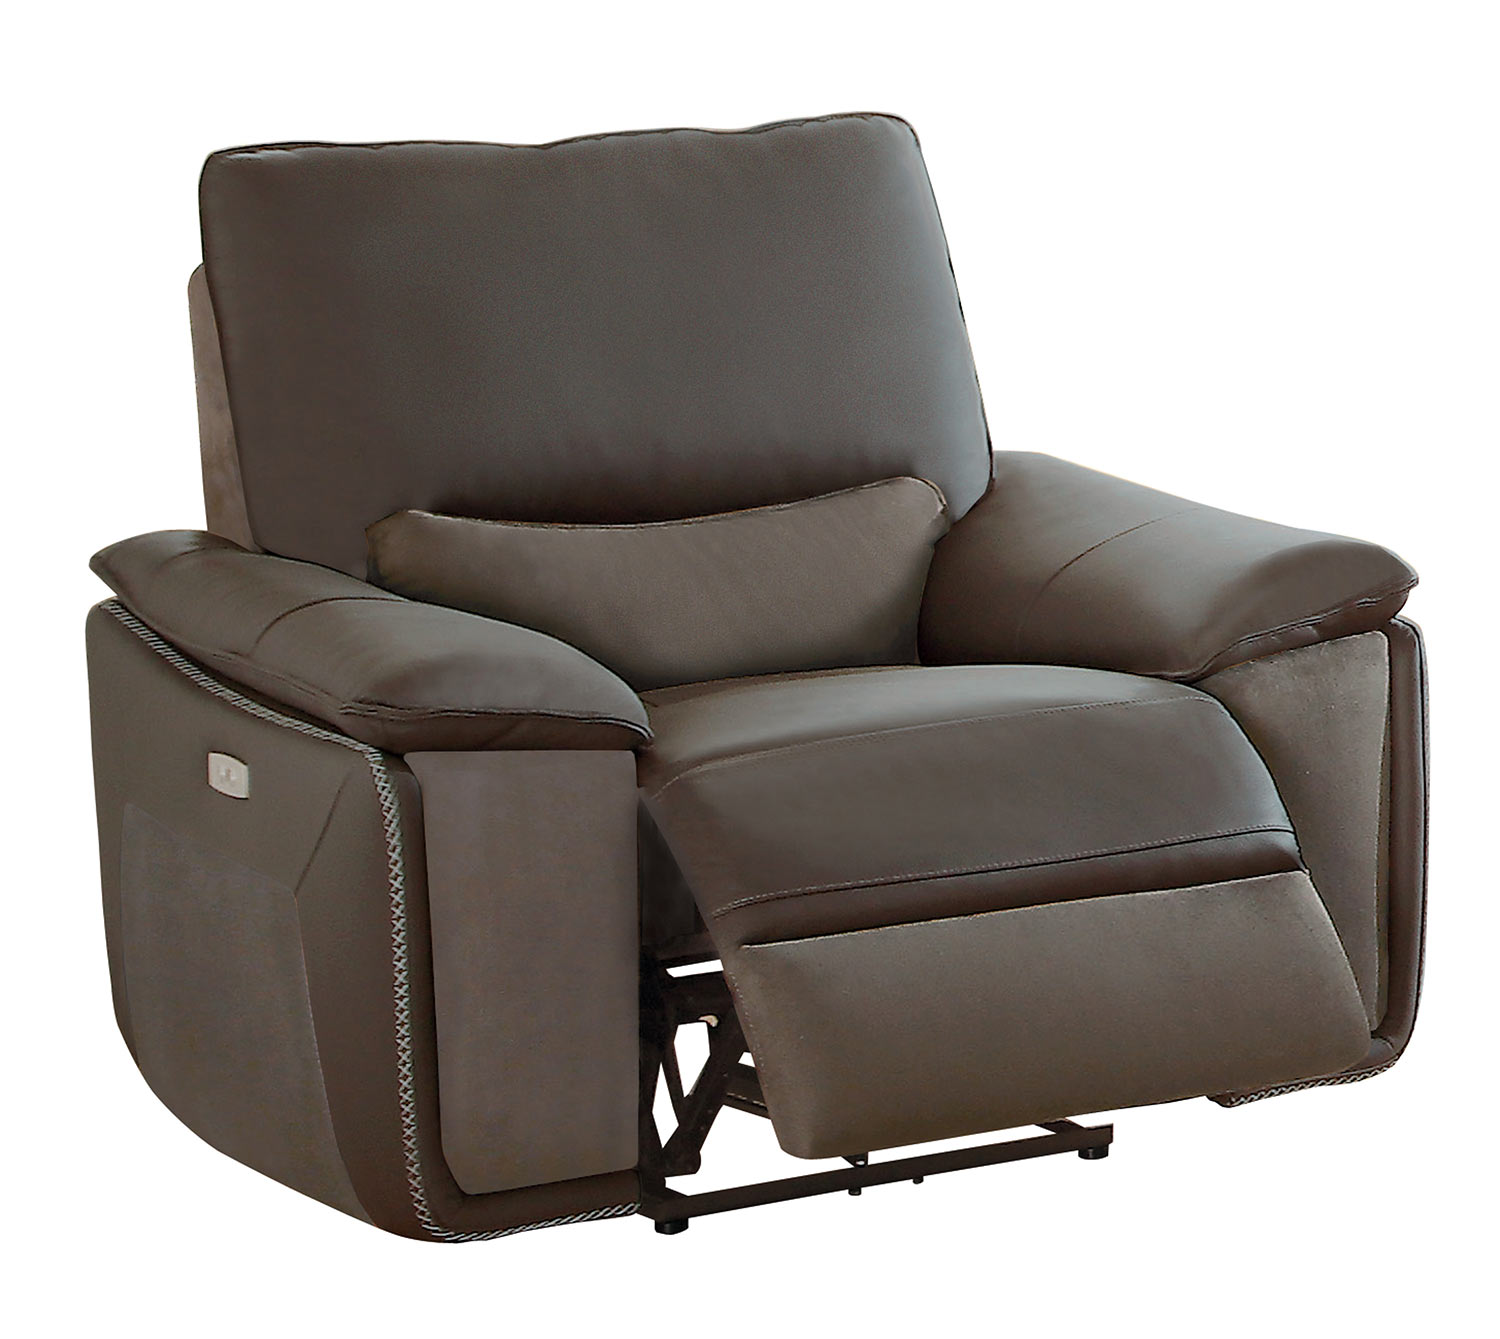 Homelegance Corazon Power Reclining Chair - Navy Gray Top Grain Leather/Fabric